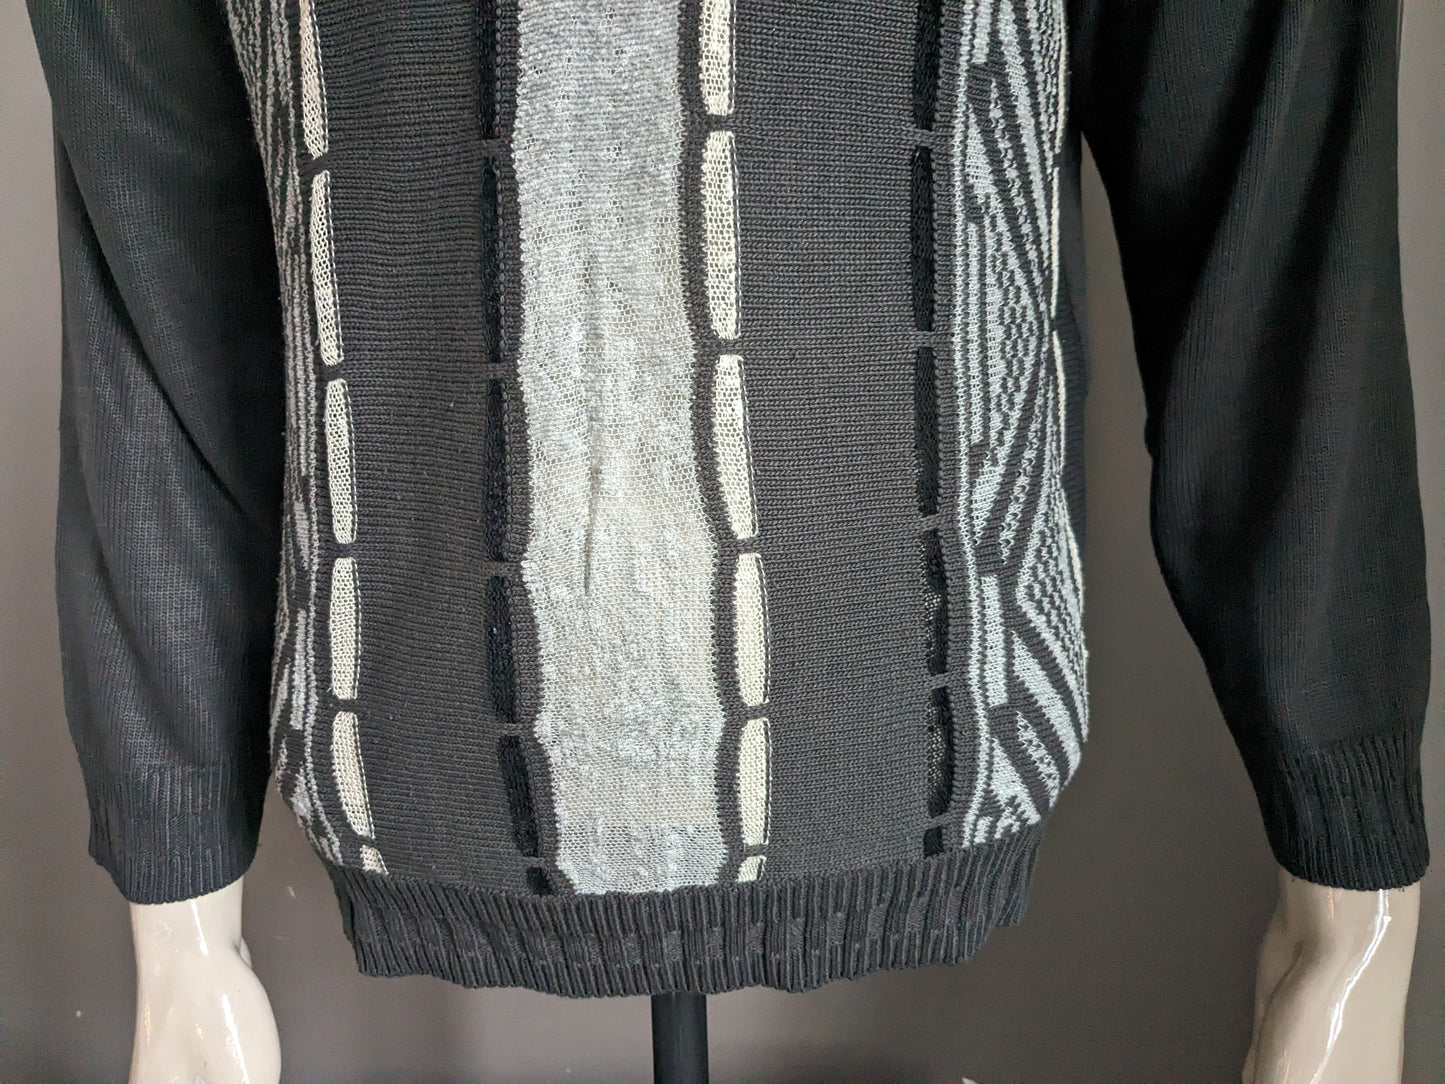 Vintage Sonne Sweater with zipper. Gray beige black colored. Size L.